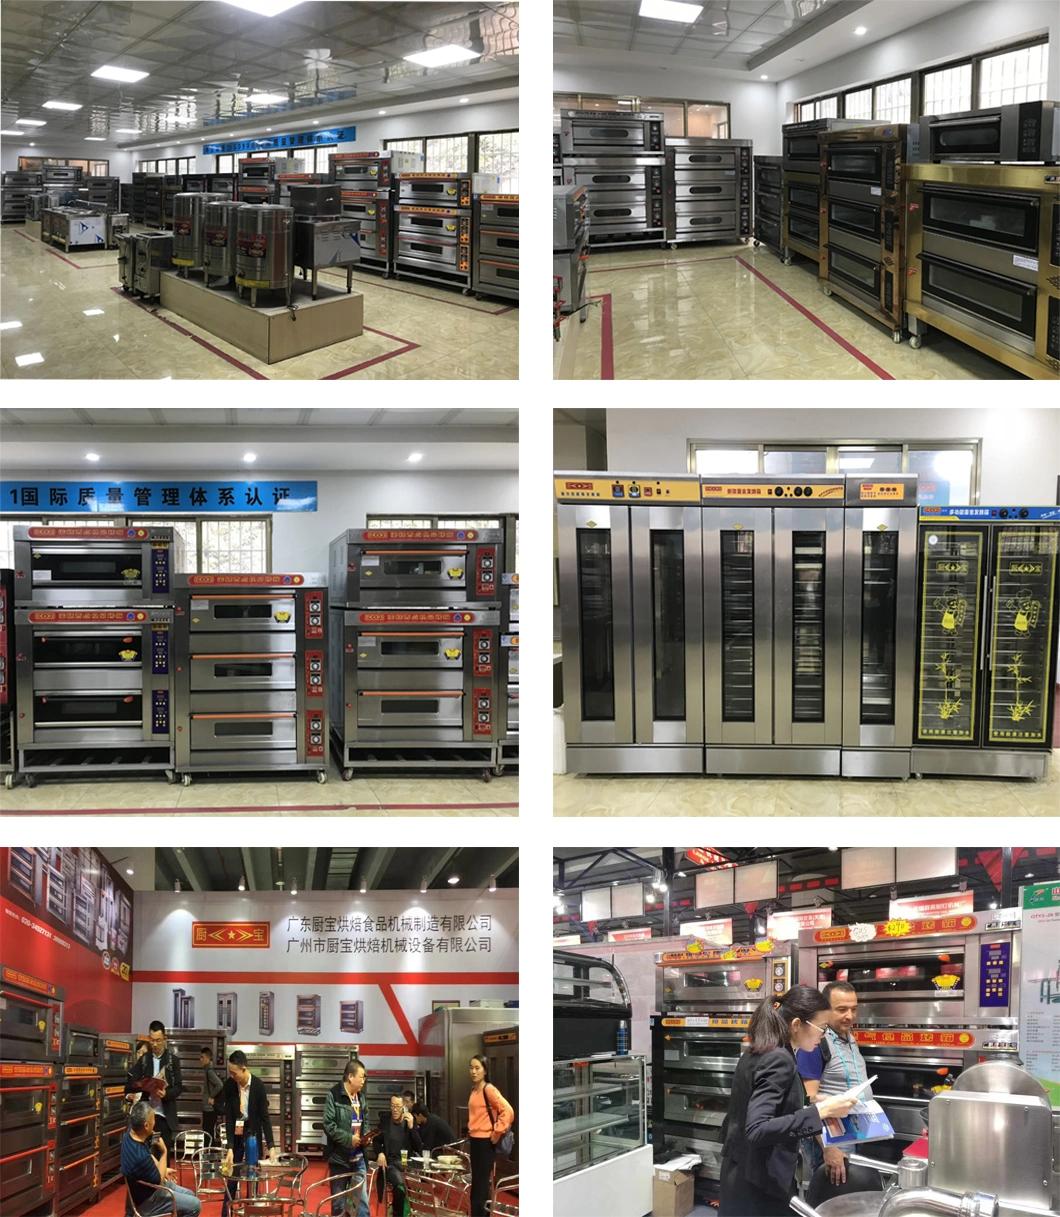 Commercial Restaurant Kitchen 2 Deck 4 Trays Electric Oven for Baking Equipment Food Machine Bakery Machinery